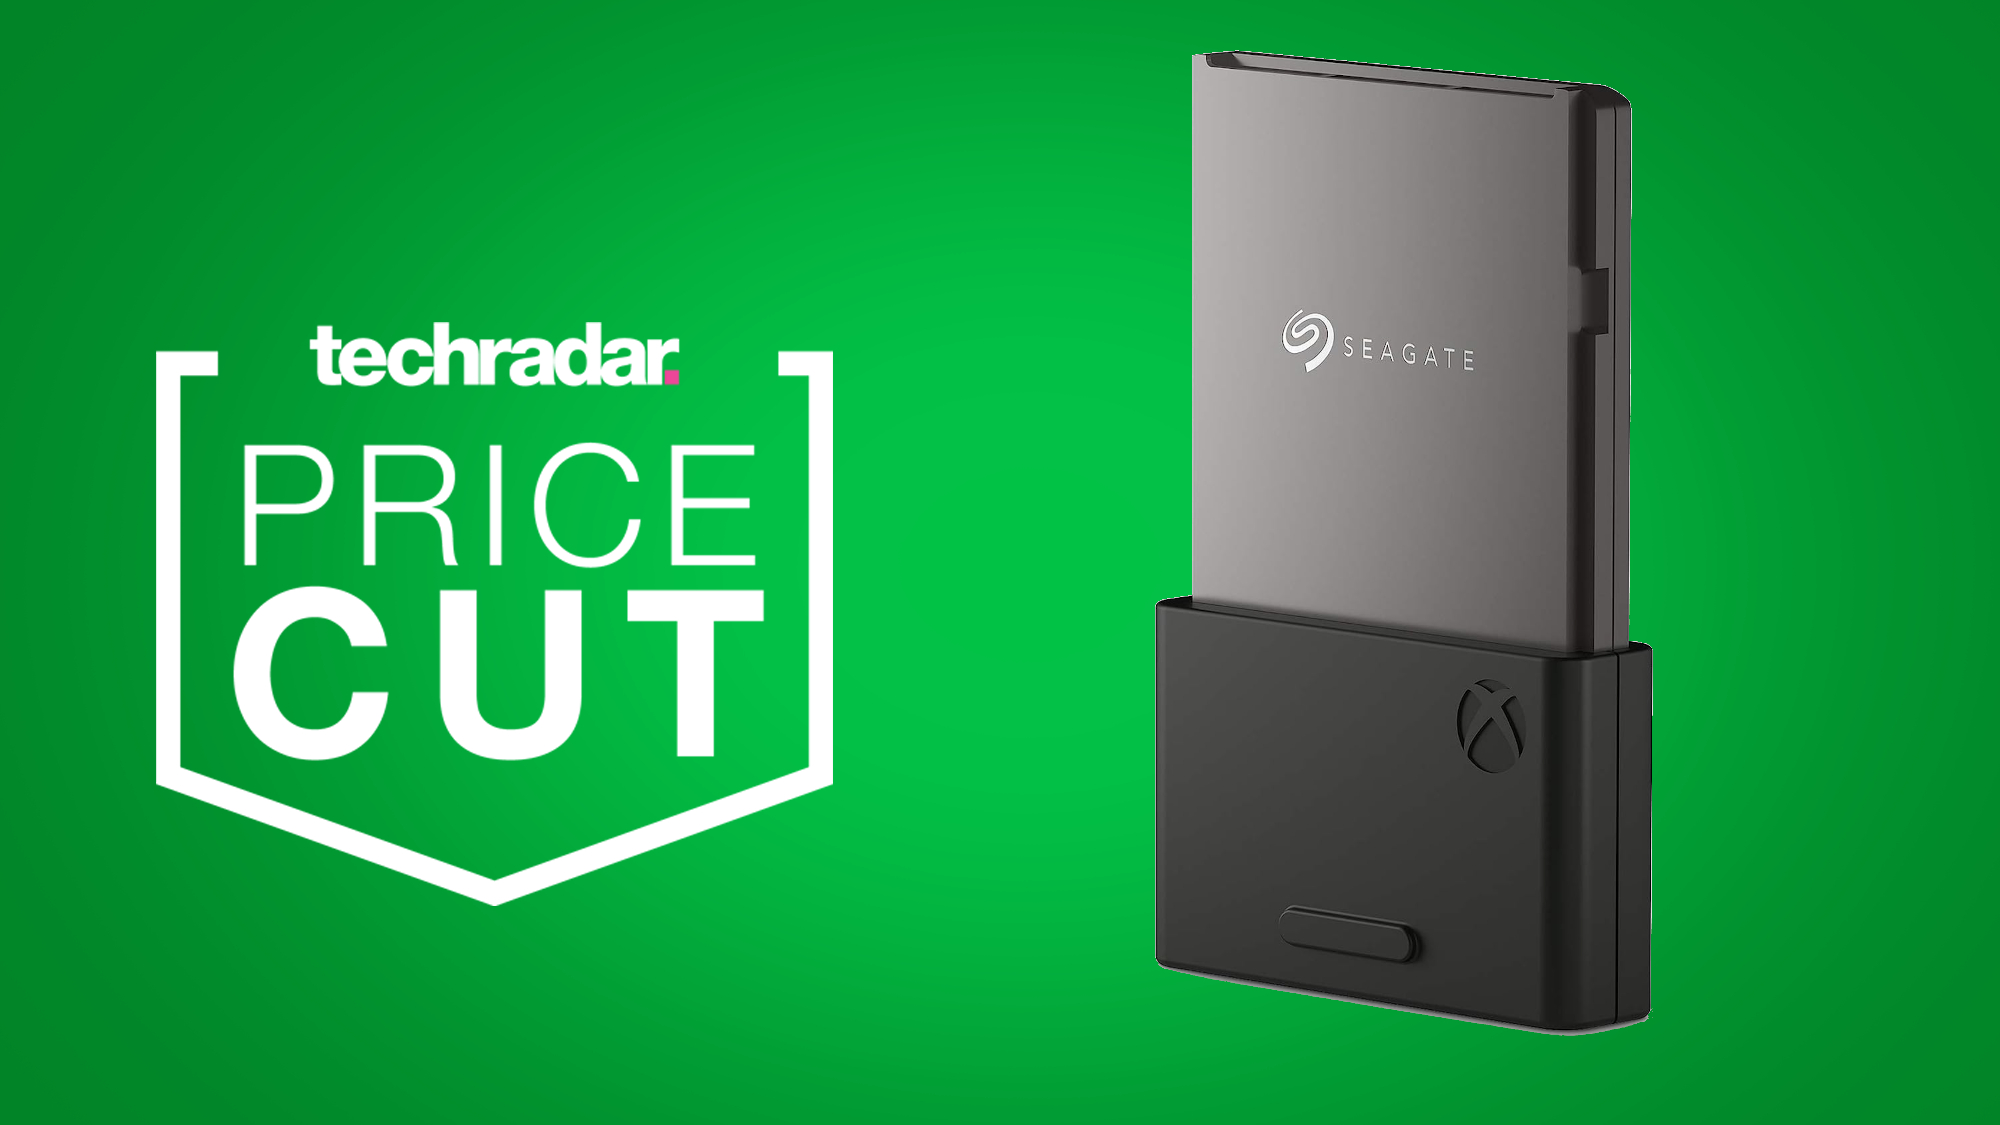 Seagate has cut the price of Xbox Series X/S storage expansion cards in the  US